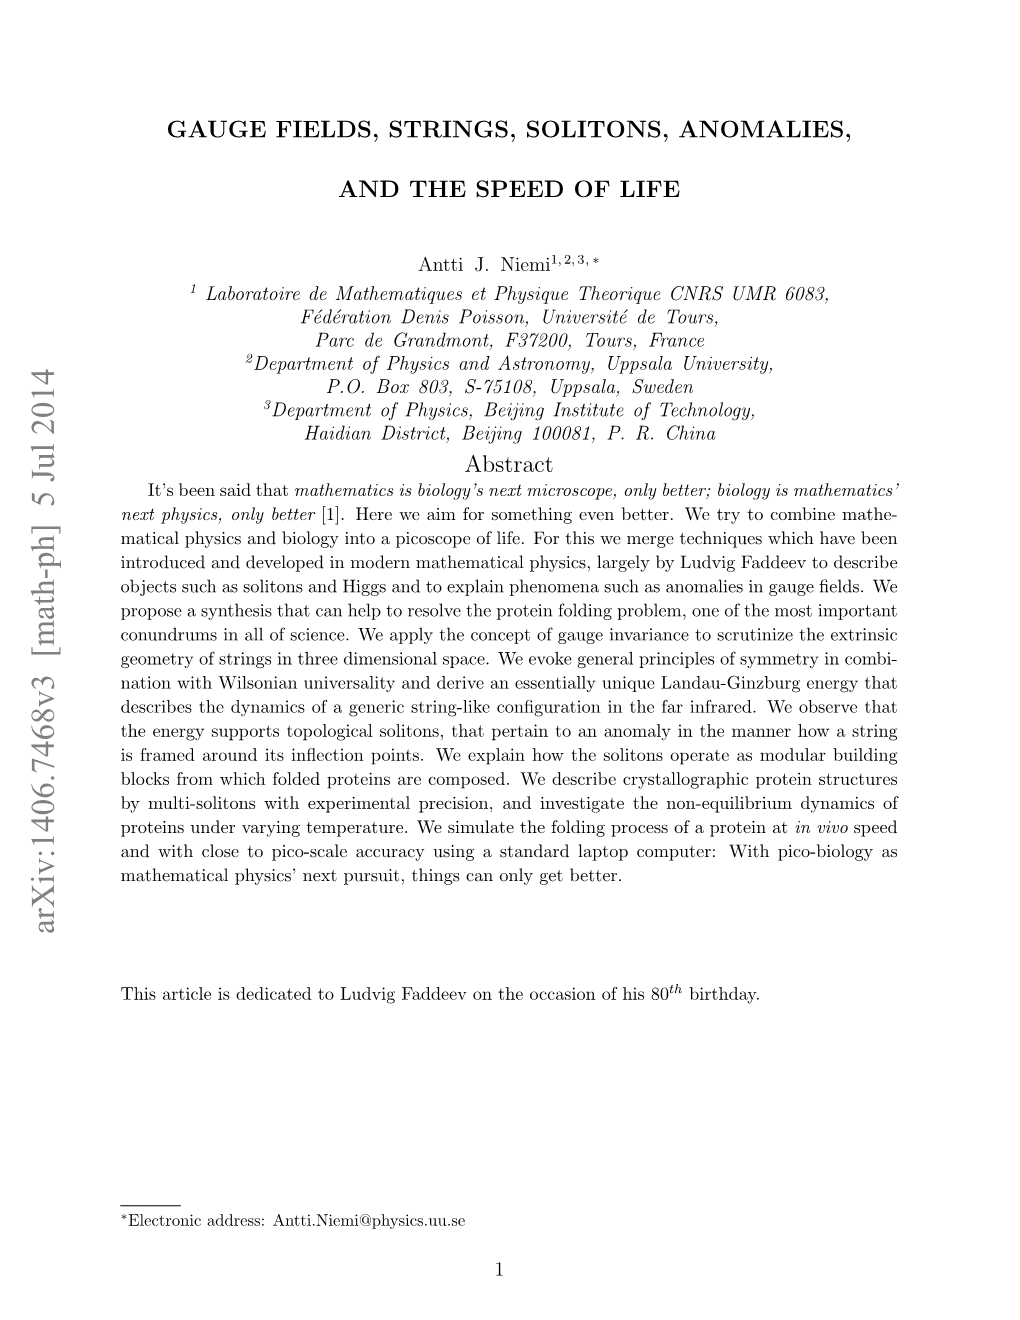 Gauge Field, Strings, Solitons, Anomalies and the Speed of Life